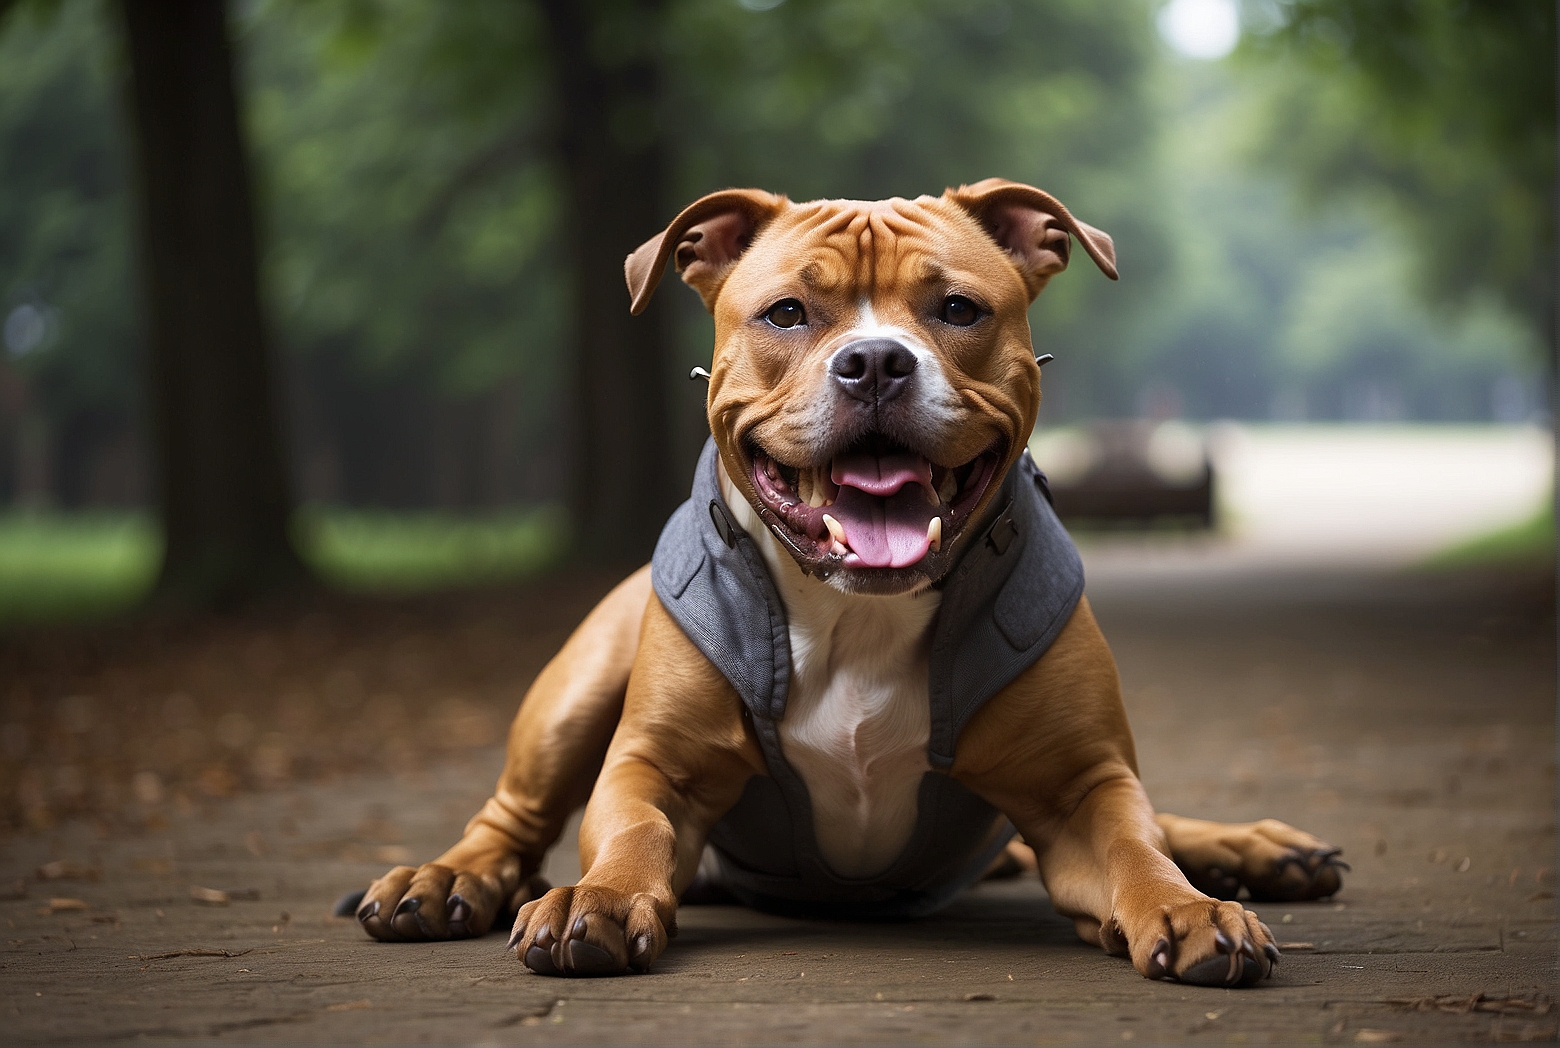 How To Make A American Staffordshire Terrier Not Aggressive